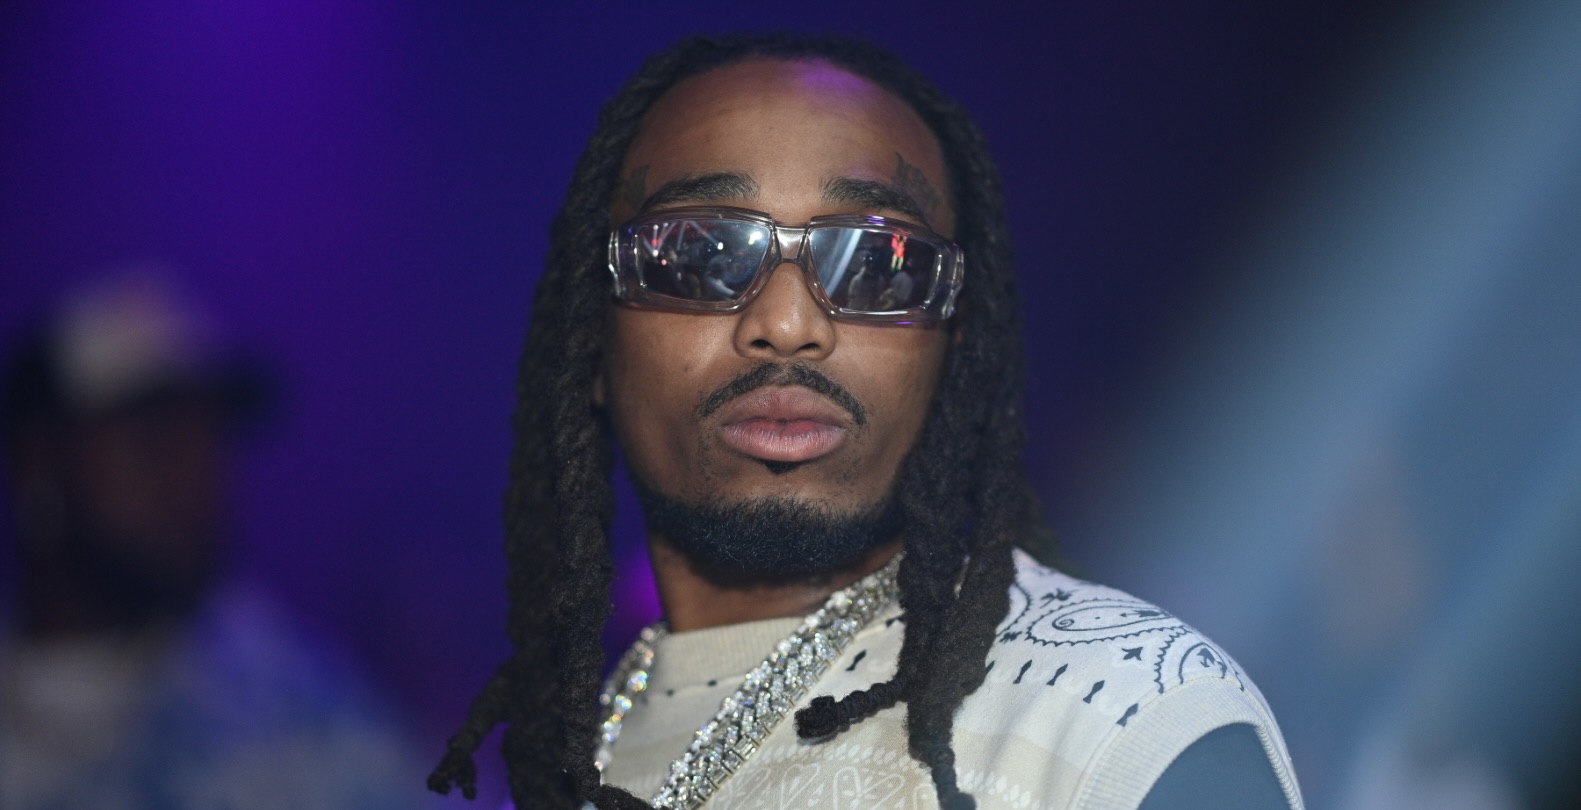 Migos Rapper Quavo Aboard Miami Yacht Being Investigated for an Alleged Strong-Arm Robbery